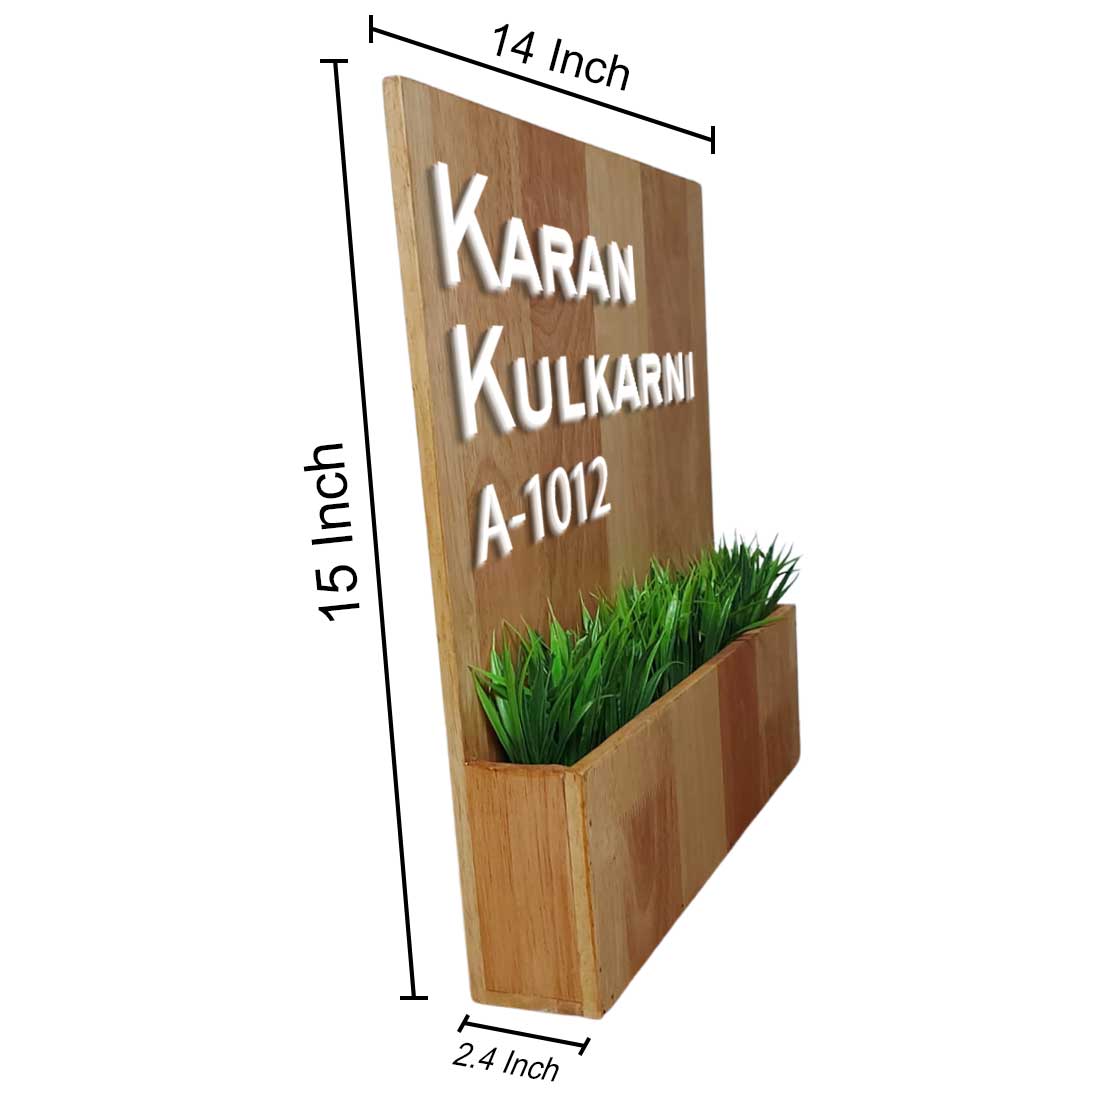 Wooden Name Board with Planter Artificial Greens Included-3D Raised Fonts